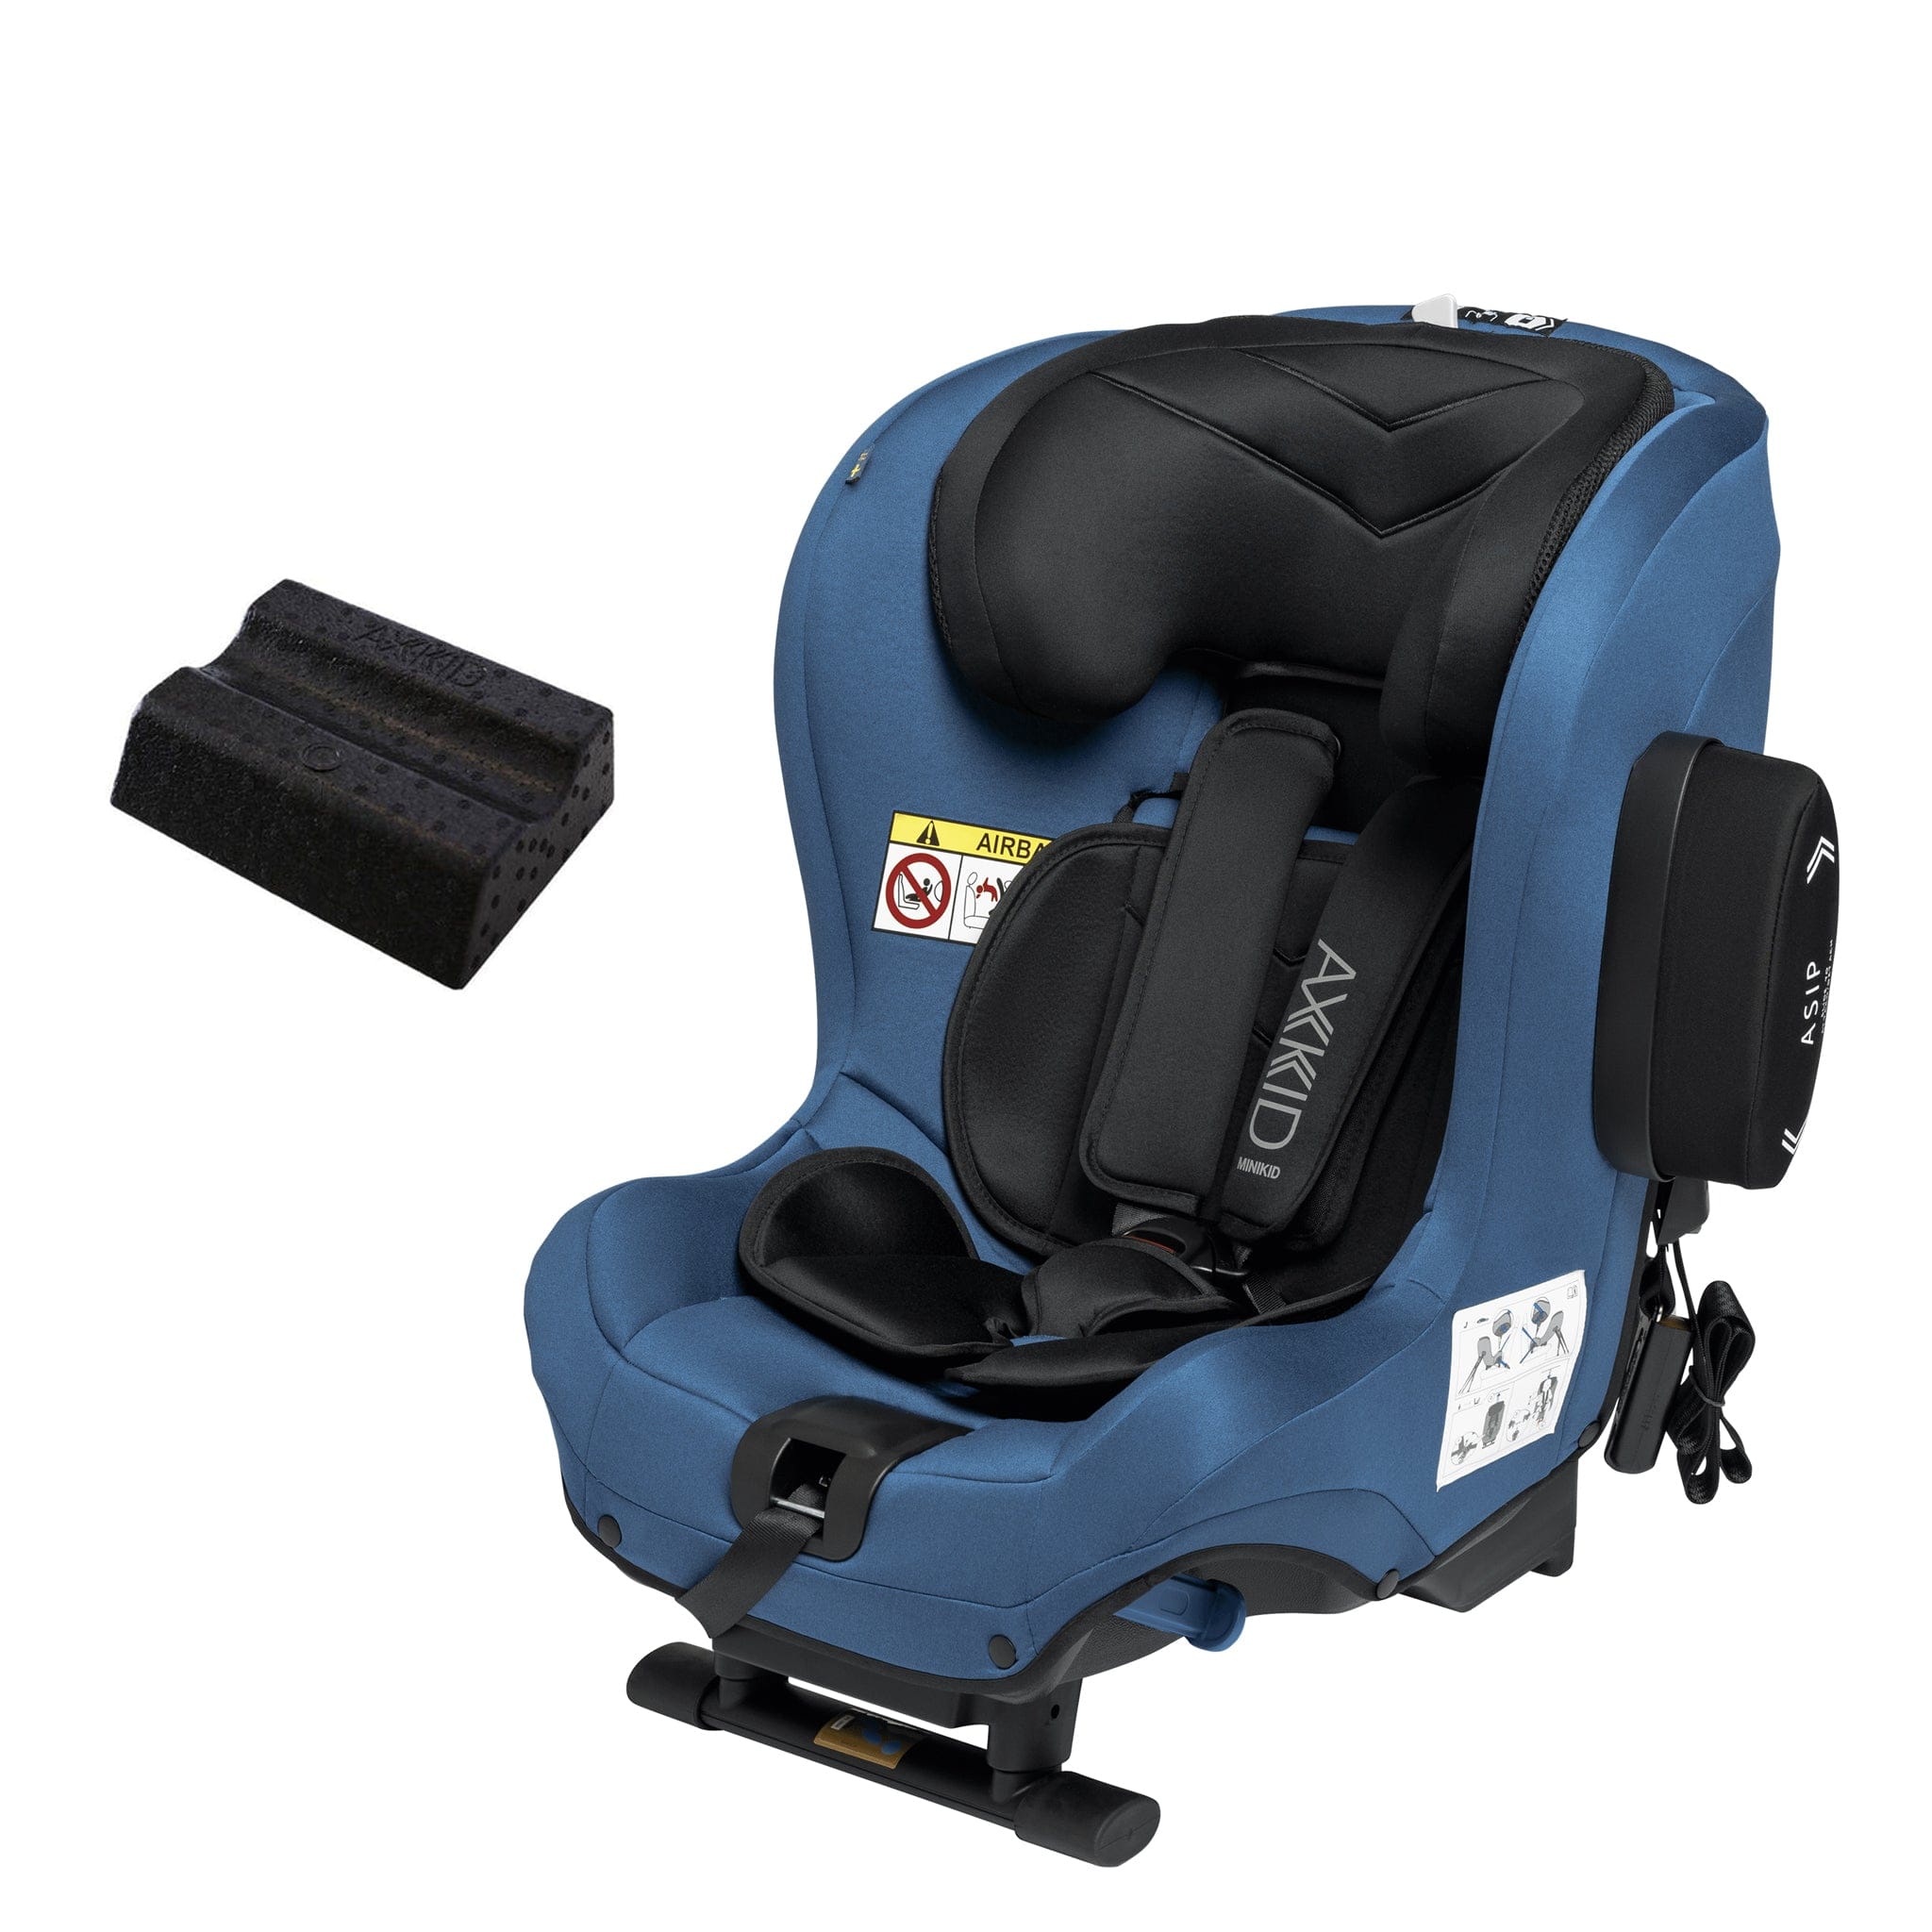 Axkid Minikid 2 - Sea With Free Wedge Extended Rear Facing Car Seats 10524-SEA 7350057585900